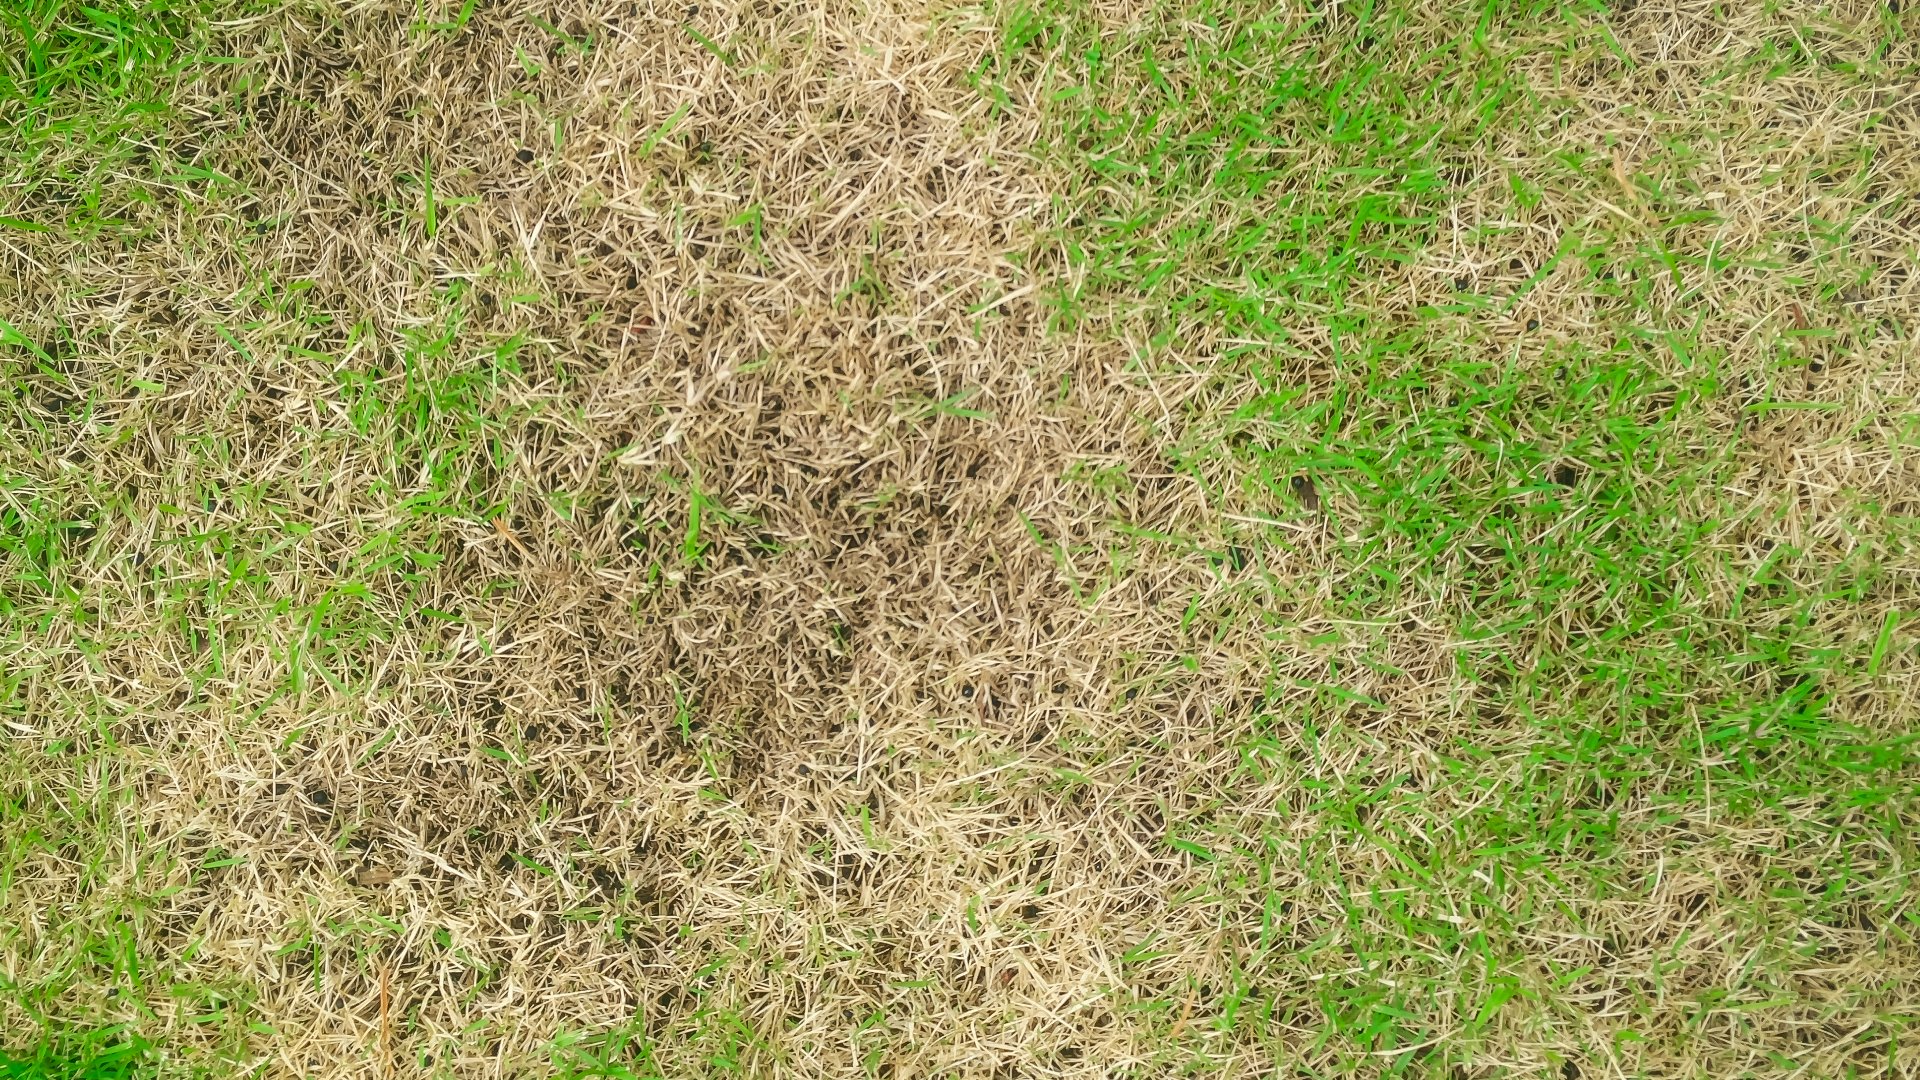 Brown Grass Causes - Dehydration, Over-Fertilization, Turf Disease, or Insects?